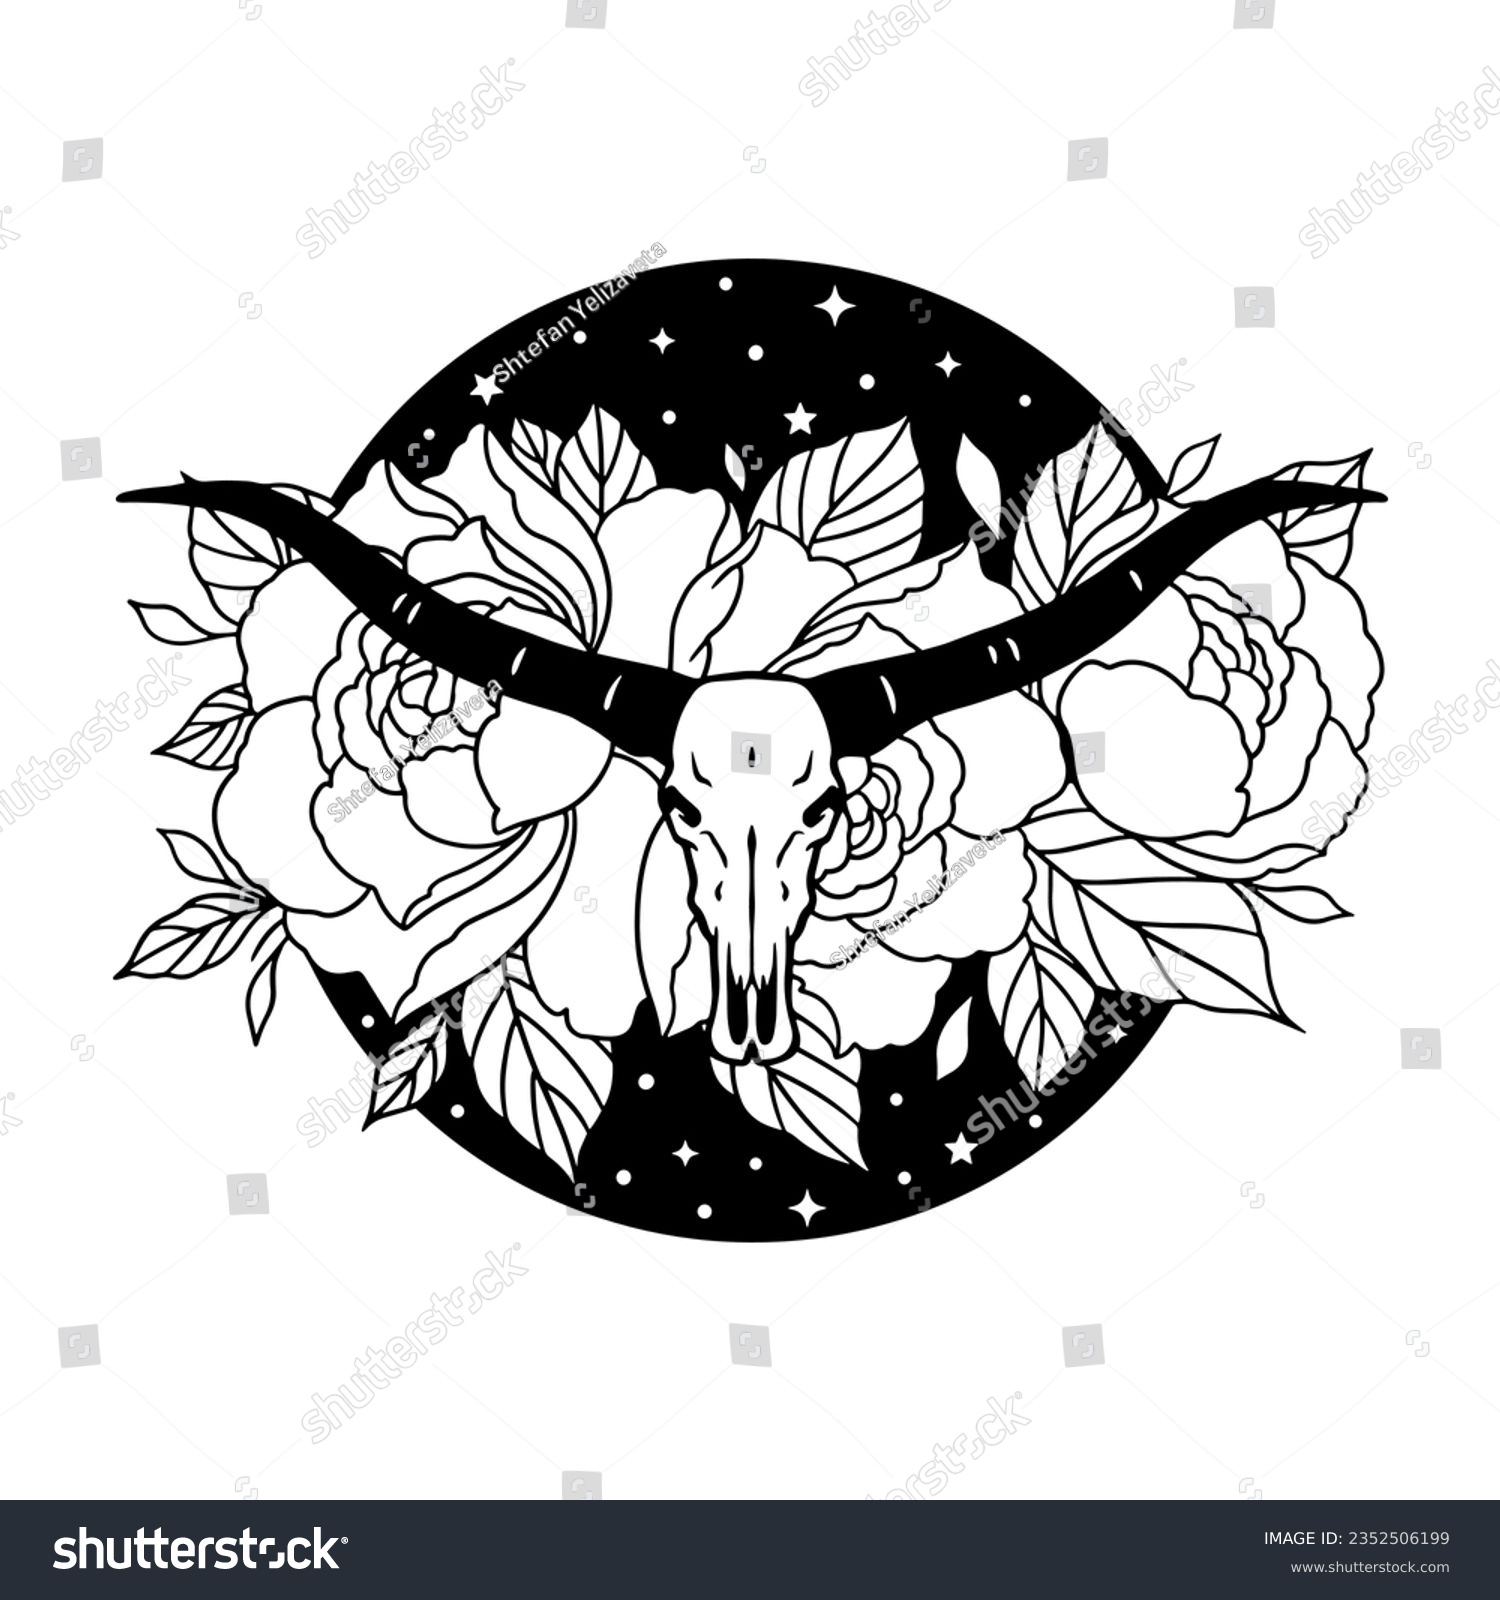 SVG of Texas longhorn black and white vector illustration. Longhorn skull with flowers, clipart. Silhouette Texas Longhorn. Bull Head Logo Icon. Hand drawn svg